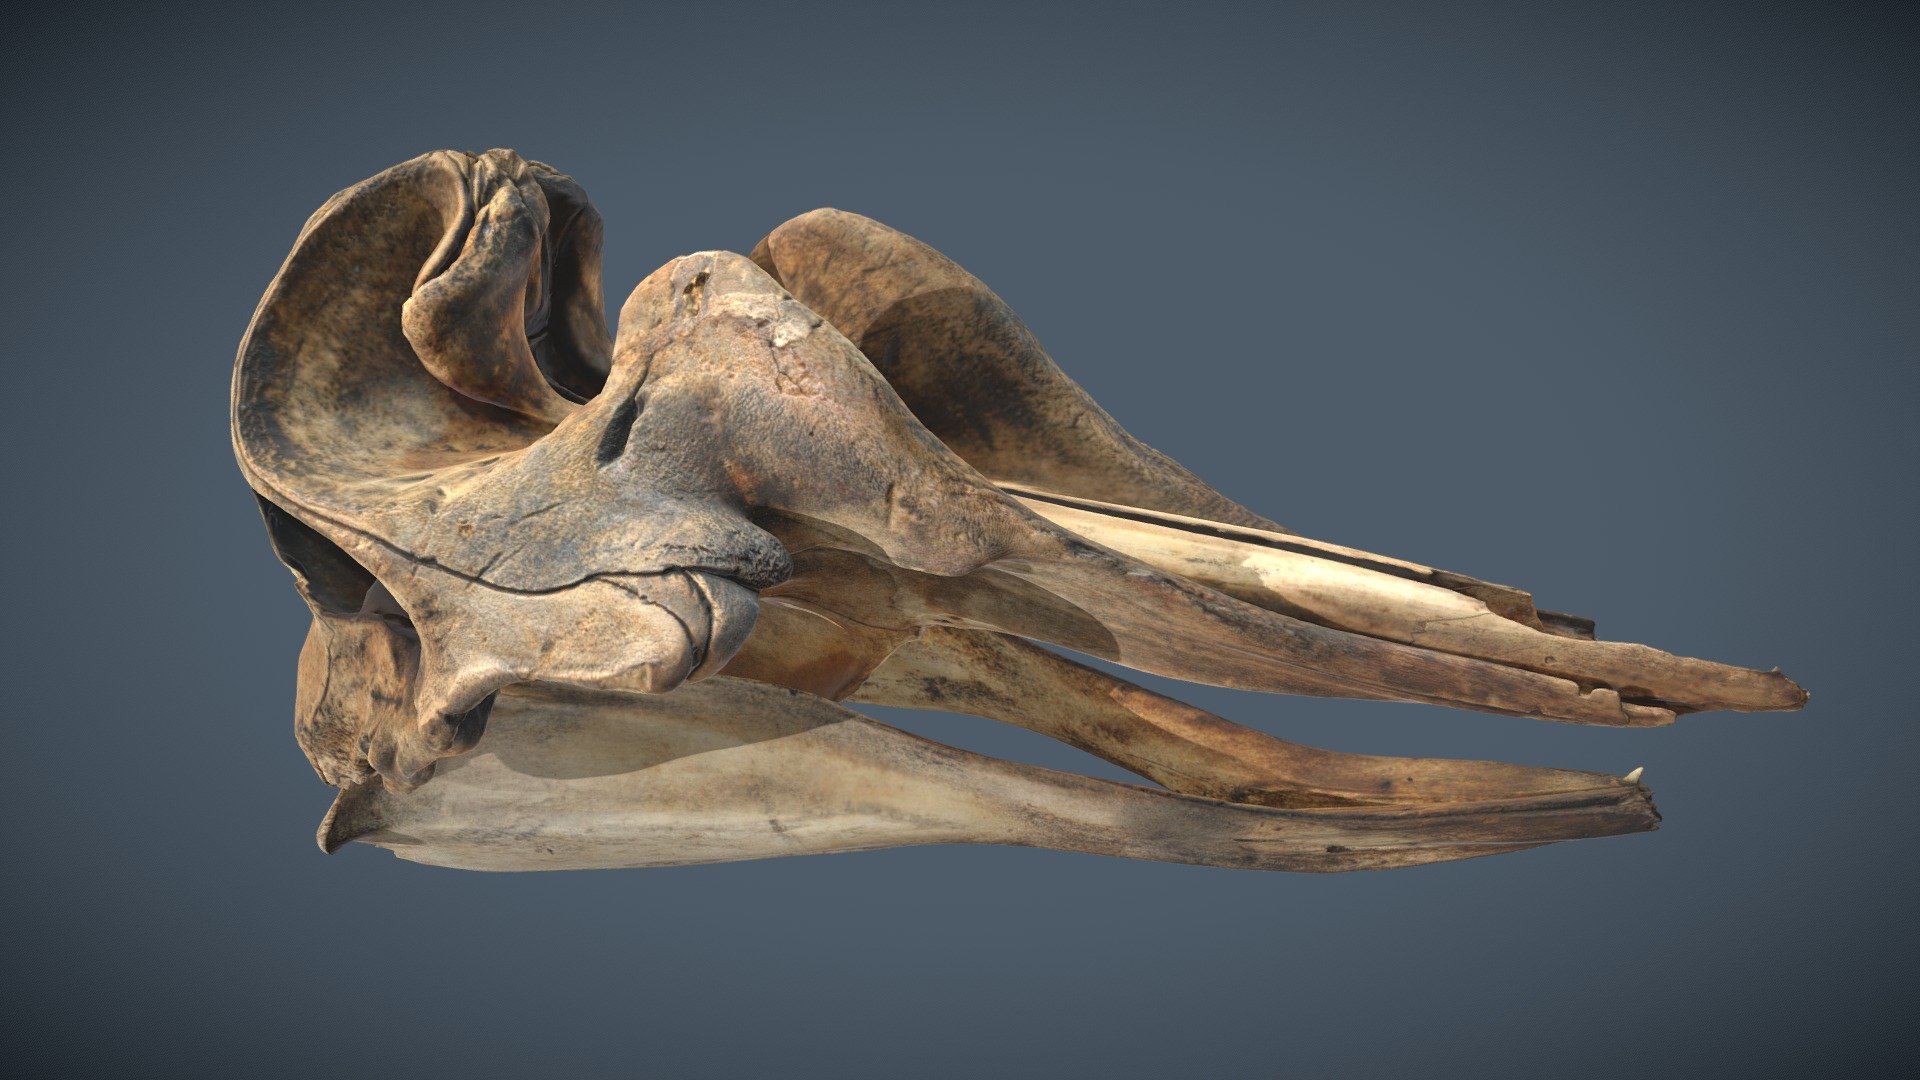 From the Hull Maritime Museum
Photogrammetry scanned by S Dey, ThinkSee3D, March 21 - Bottlenose Whale Skull & Mandible - 3D model by ThinkSee3D 3d model